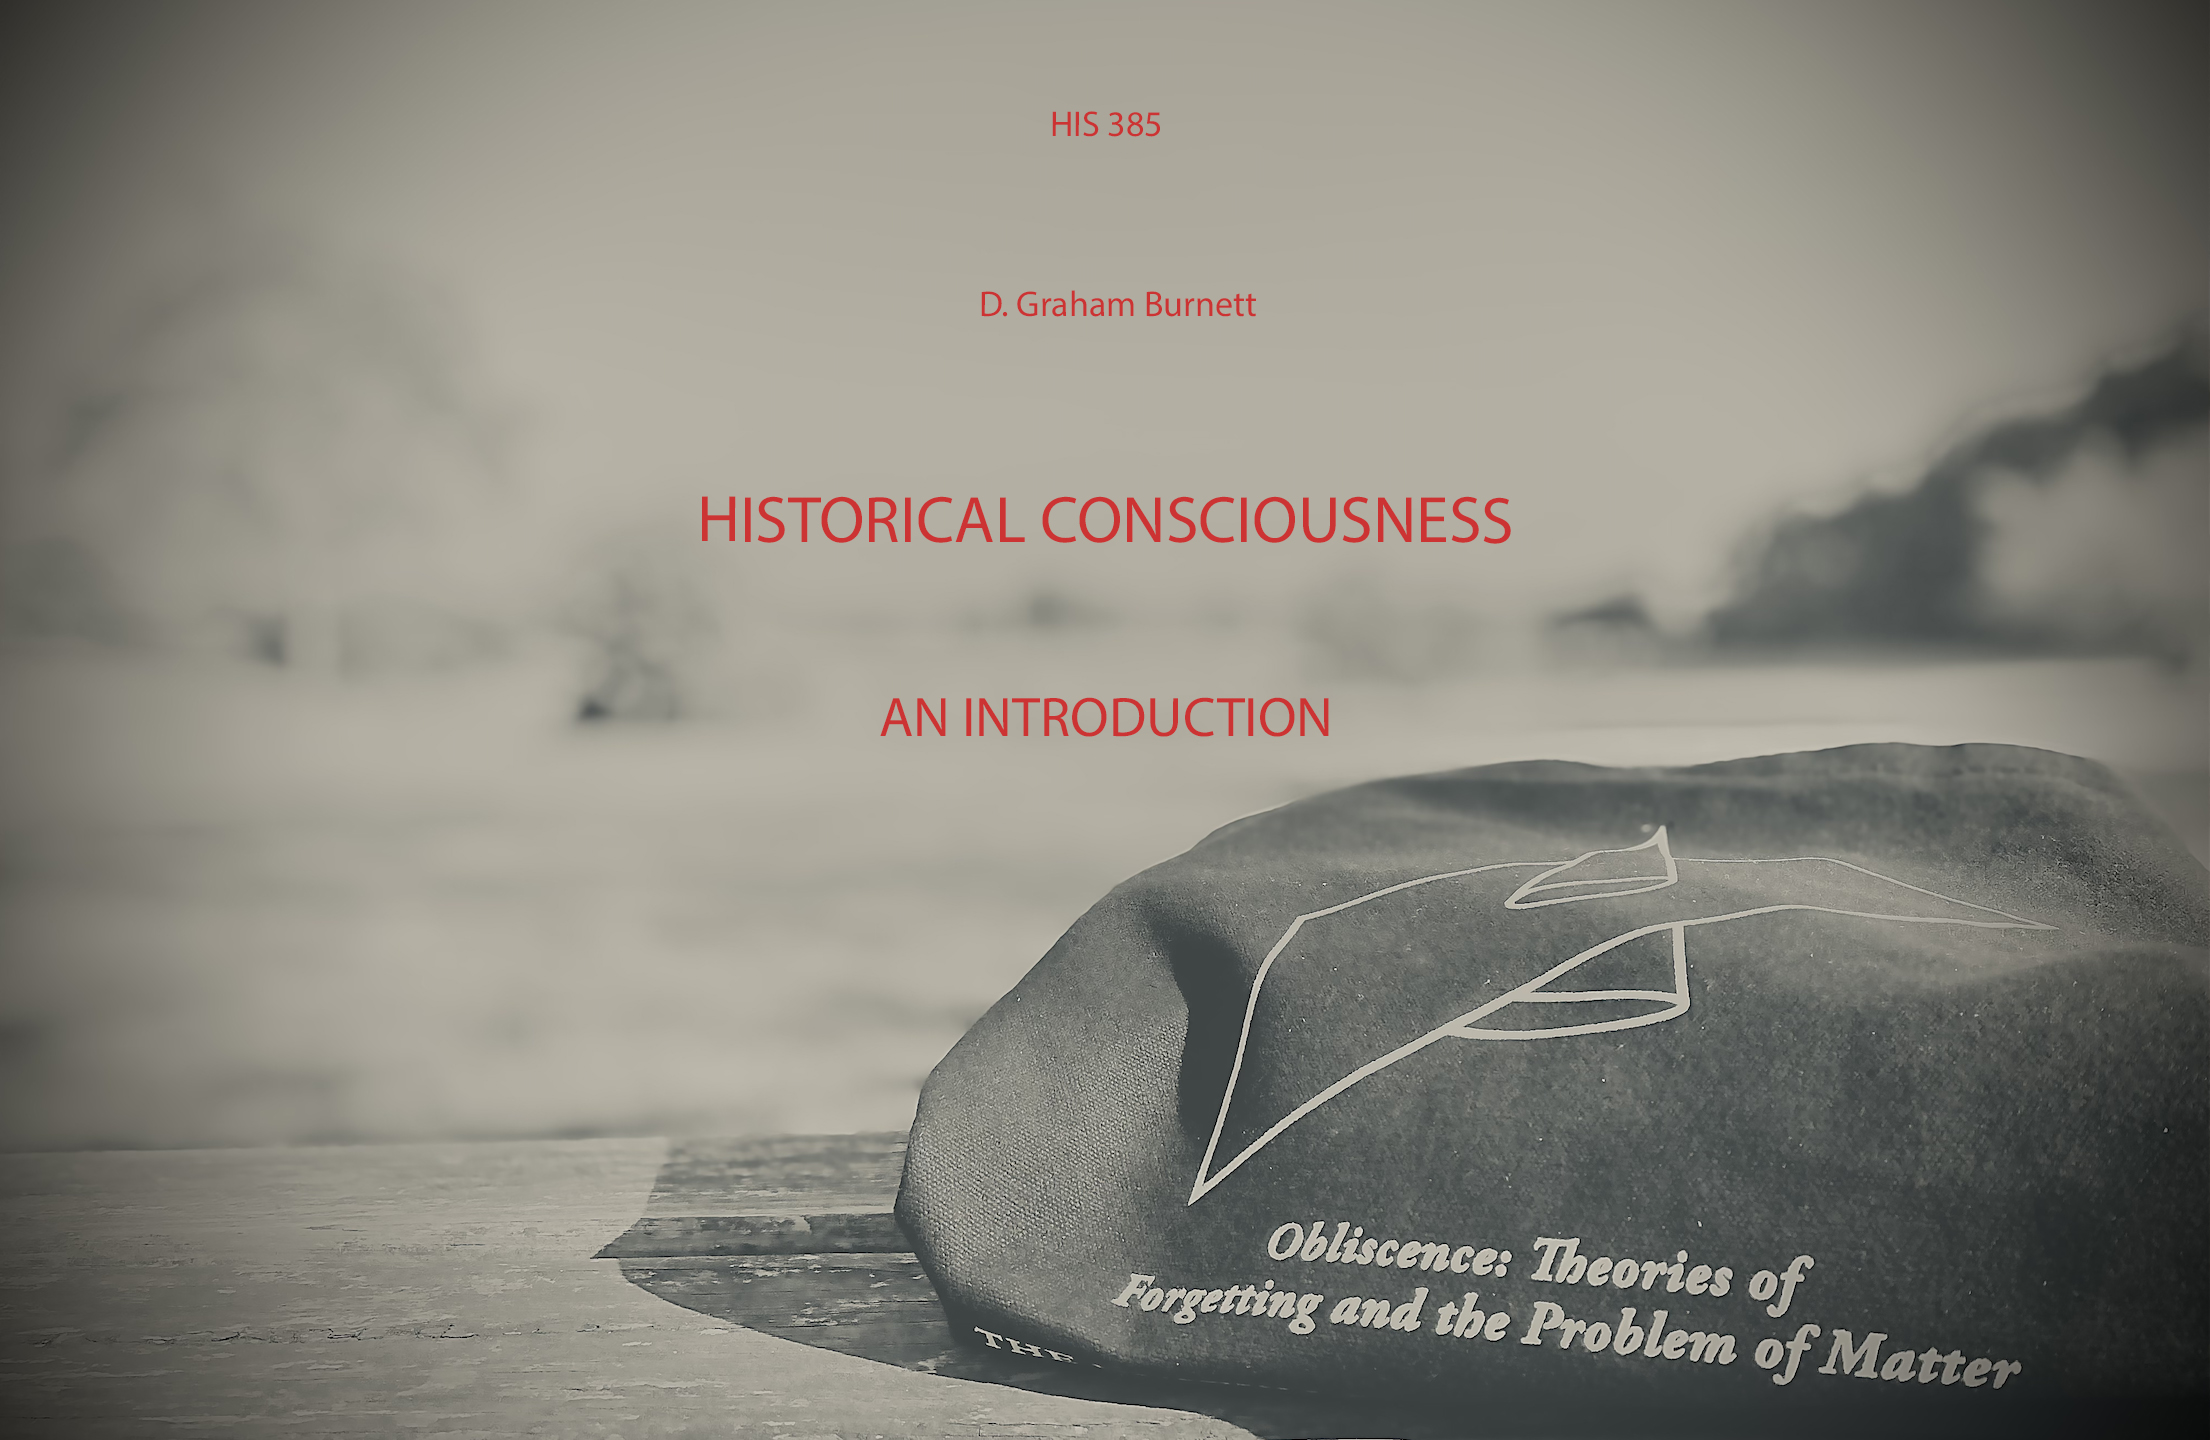 Matter and Consciousness: A Contemporary Introduction to the